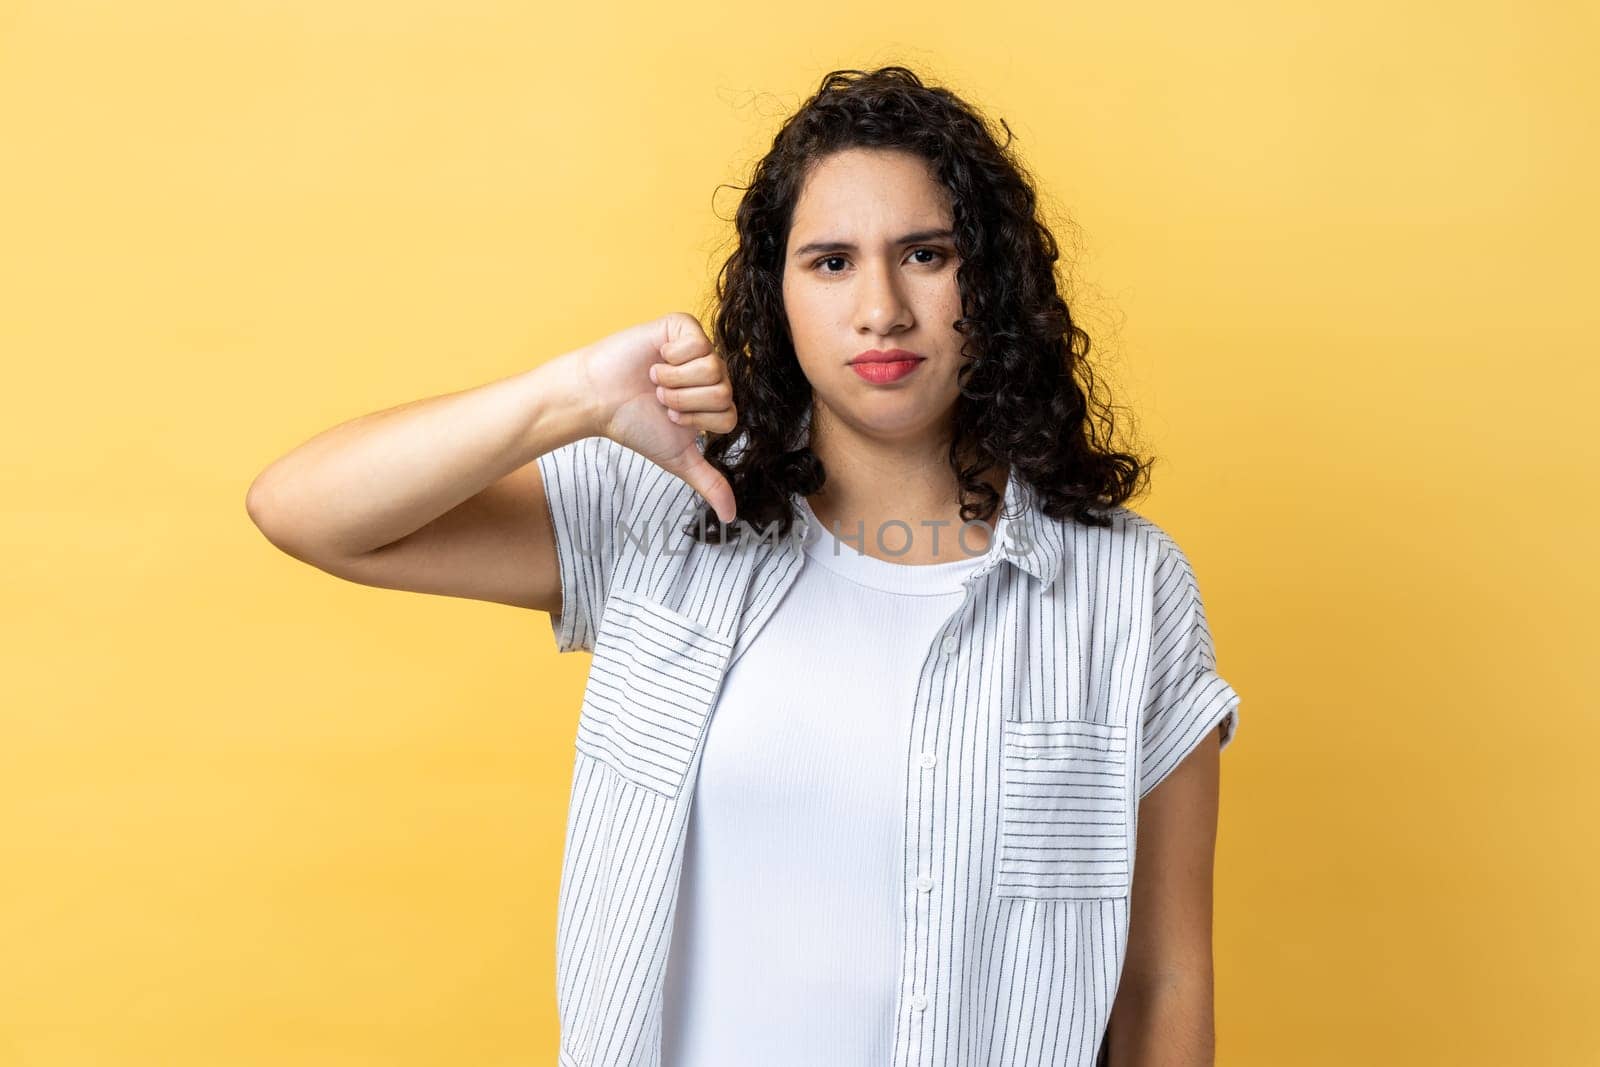 Portrait of woman with dark wavy hair criticizing bad quality with thumbs down displeased grimace, showing dislike gesture, expressing disapproval. Indoor studio shot isolated on yellow background.